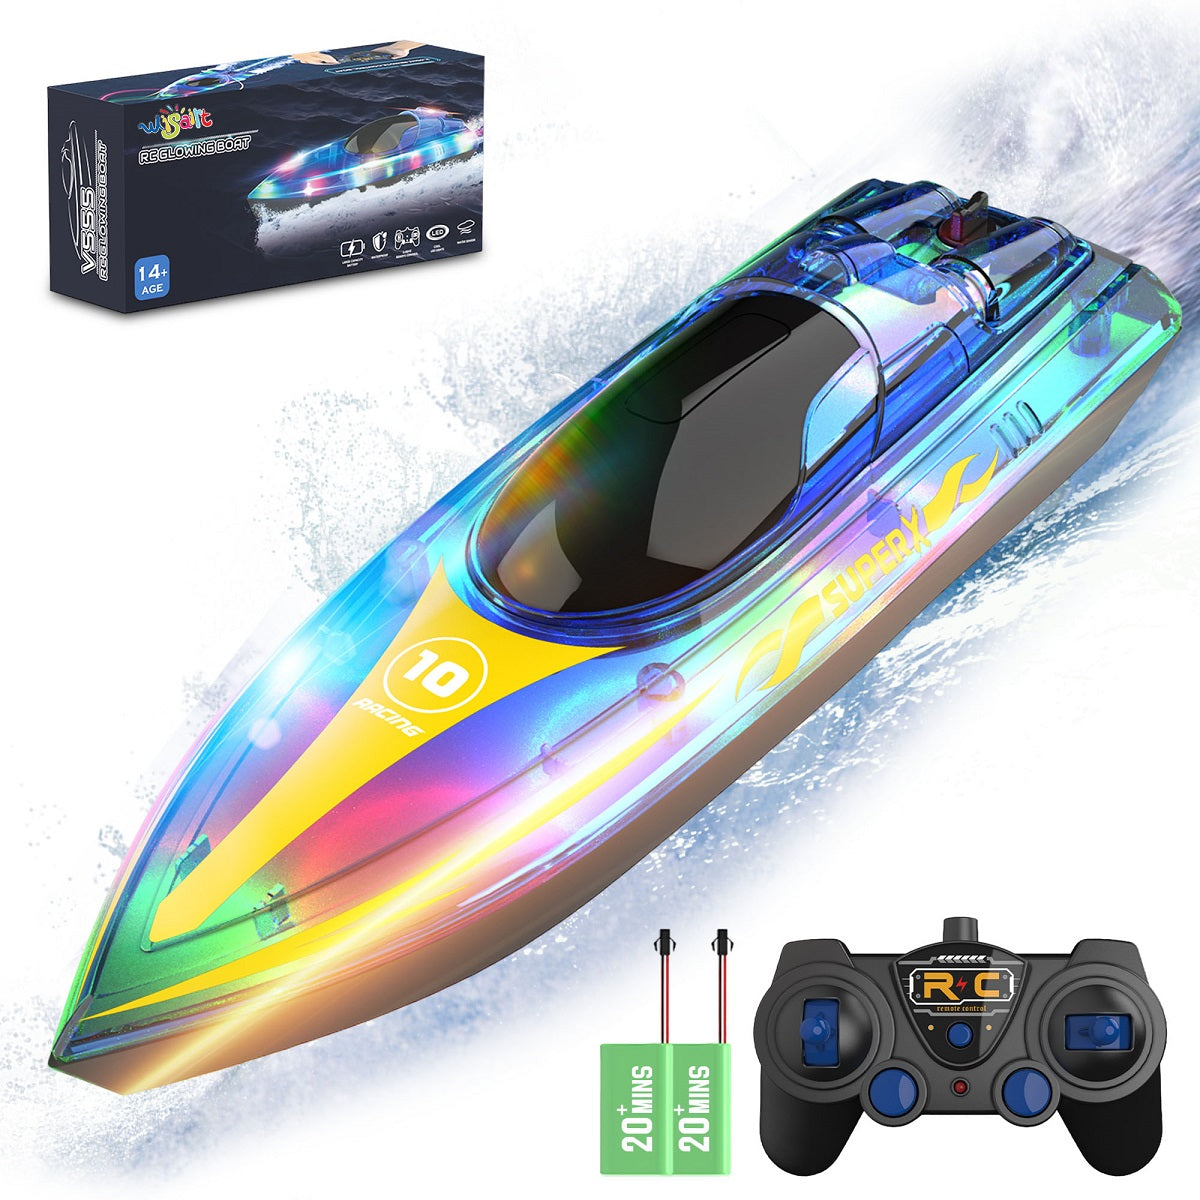 WISAIRT RC Boat,Remote Control Boat with Led Lights for Adults and Kids